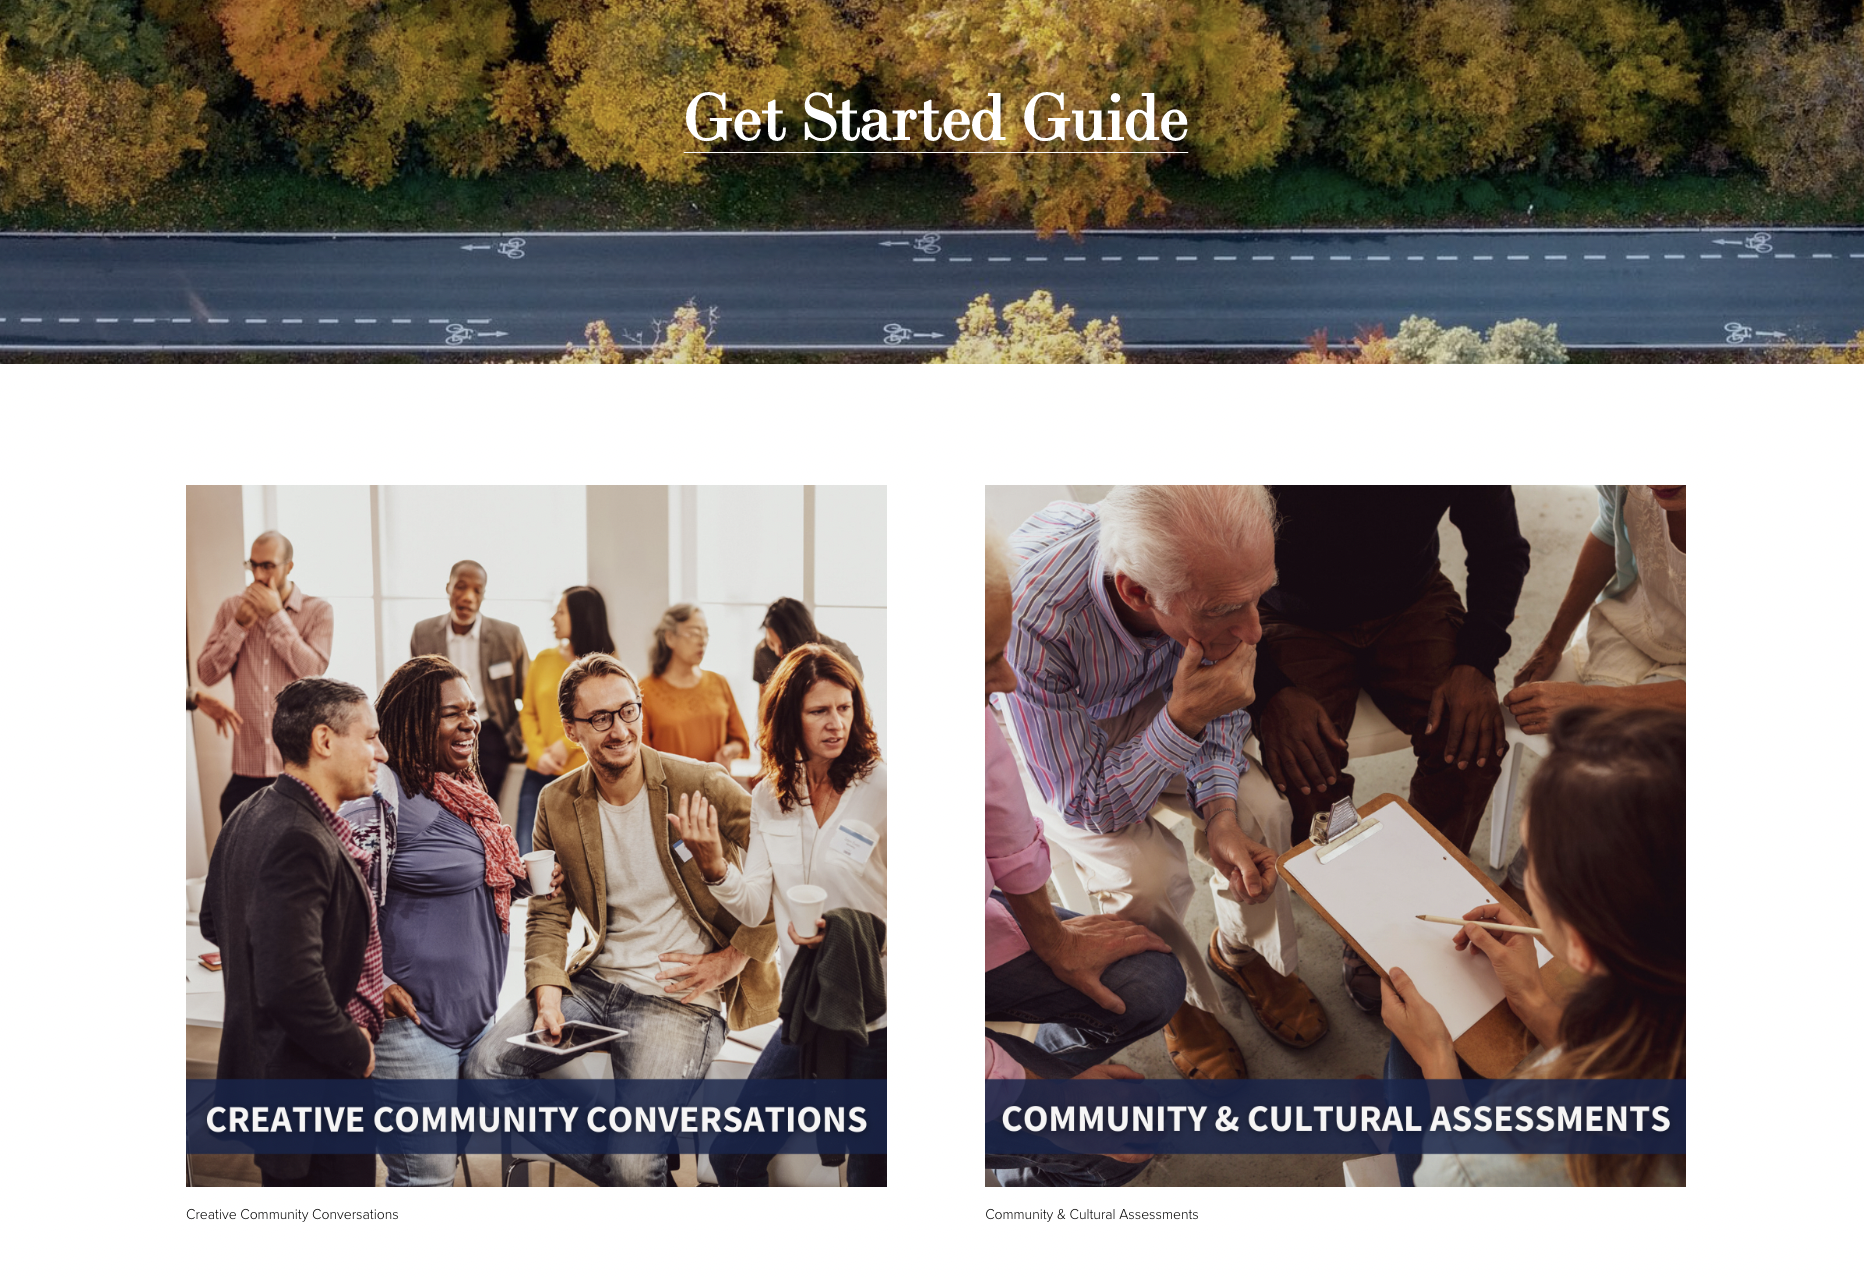 Get Started Guide with icons for creative community conversations and community & cultural assessments